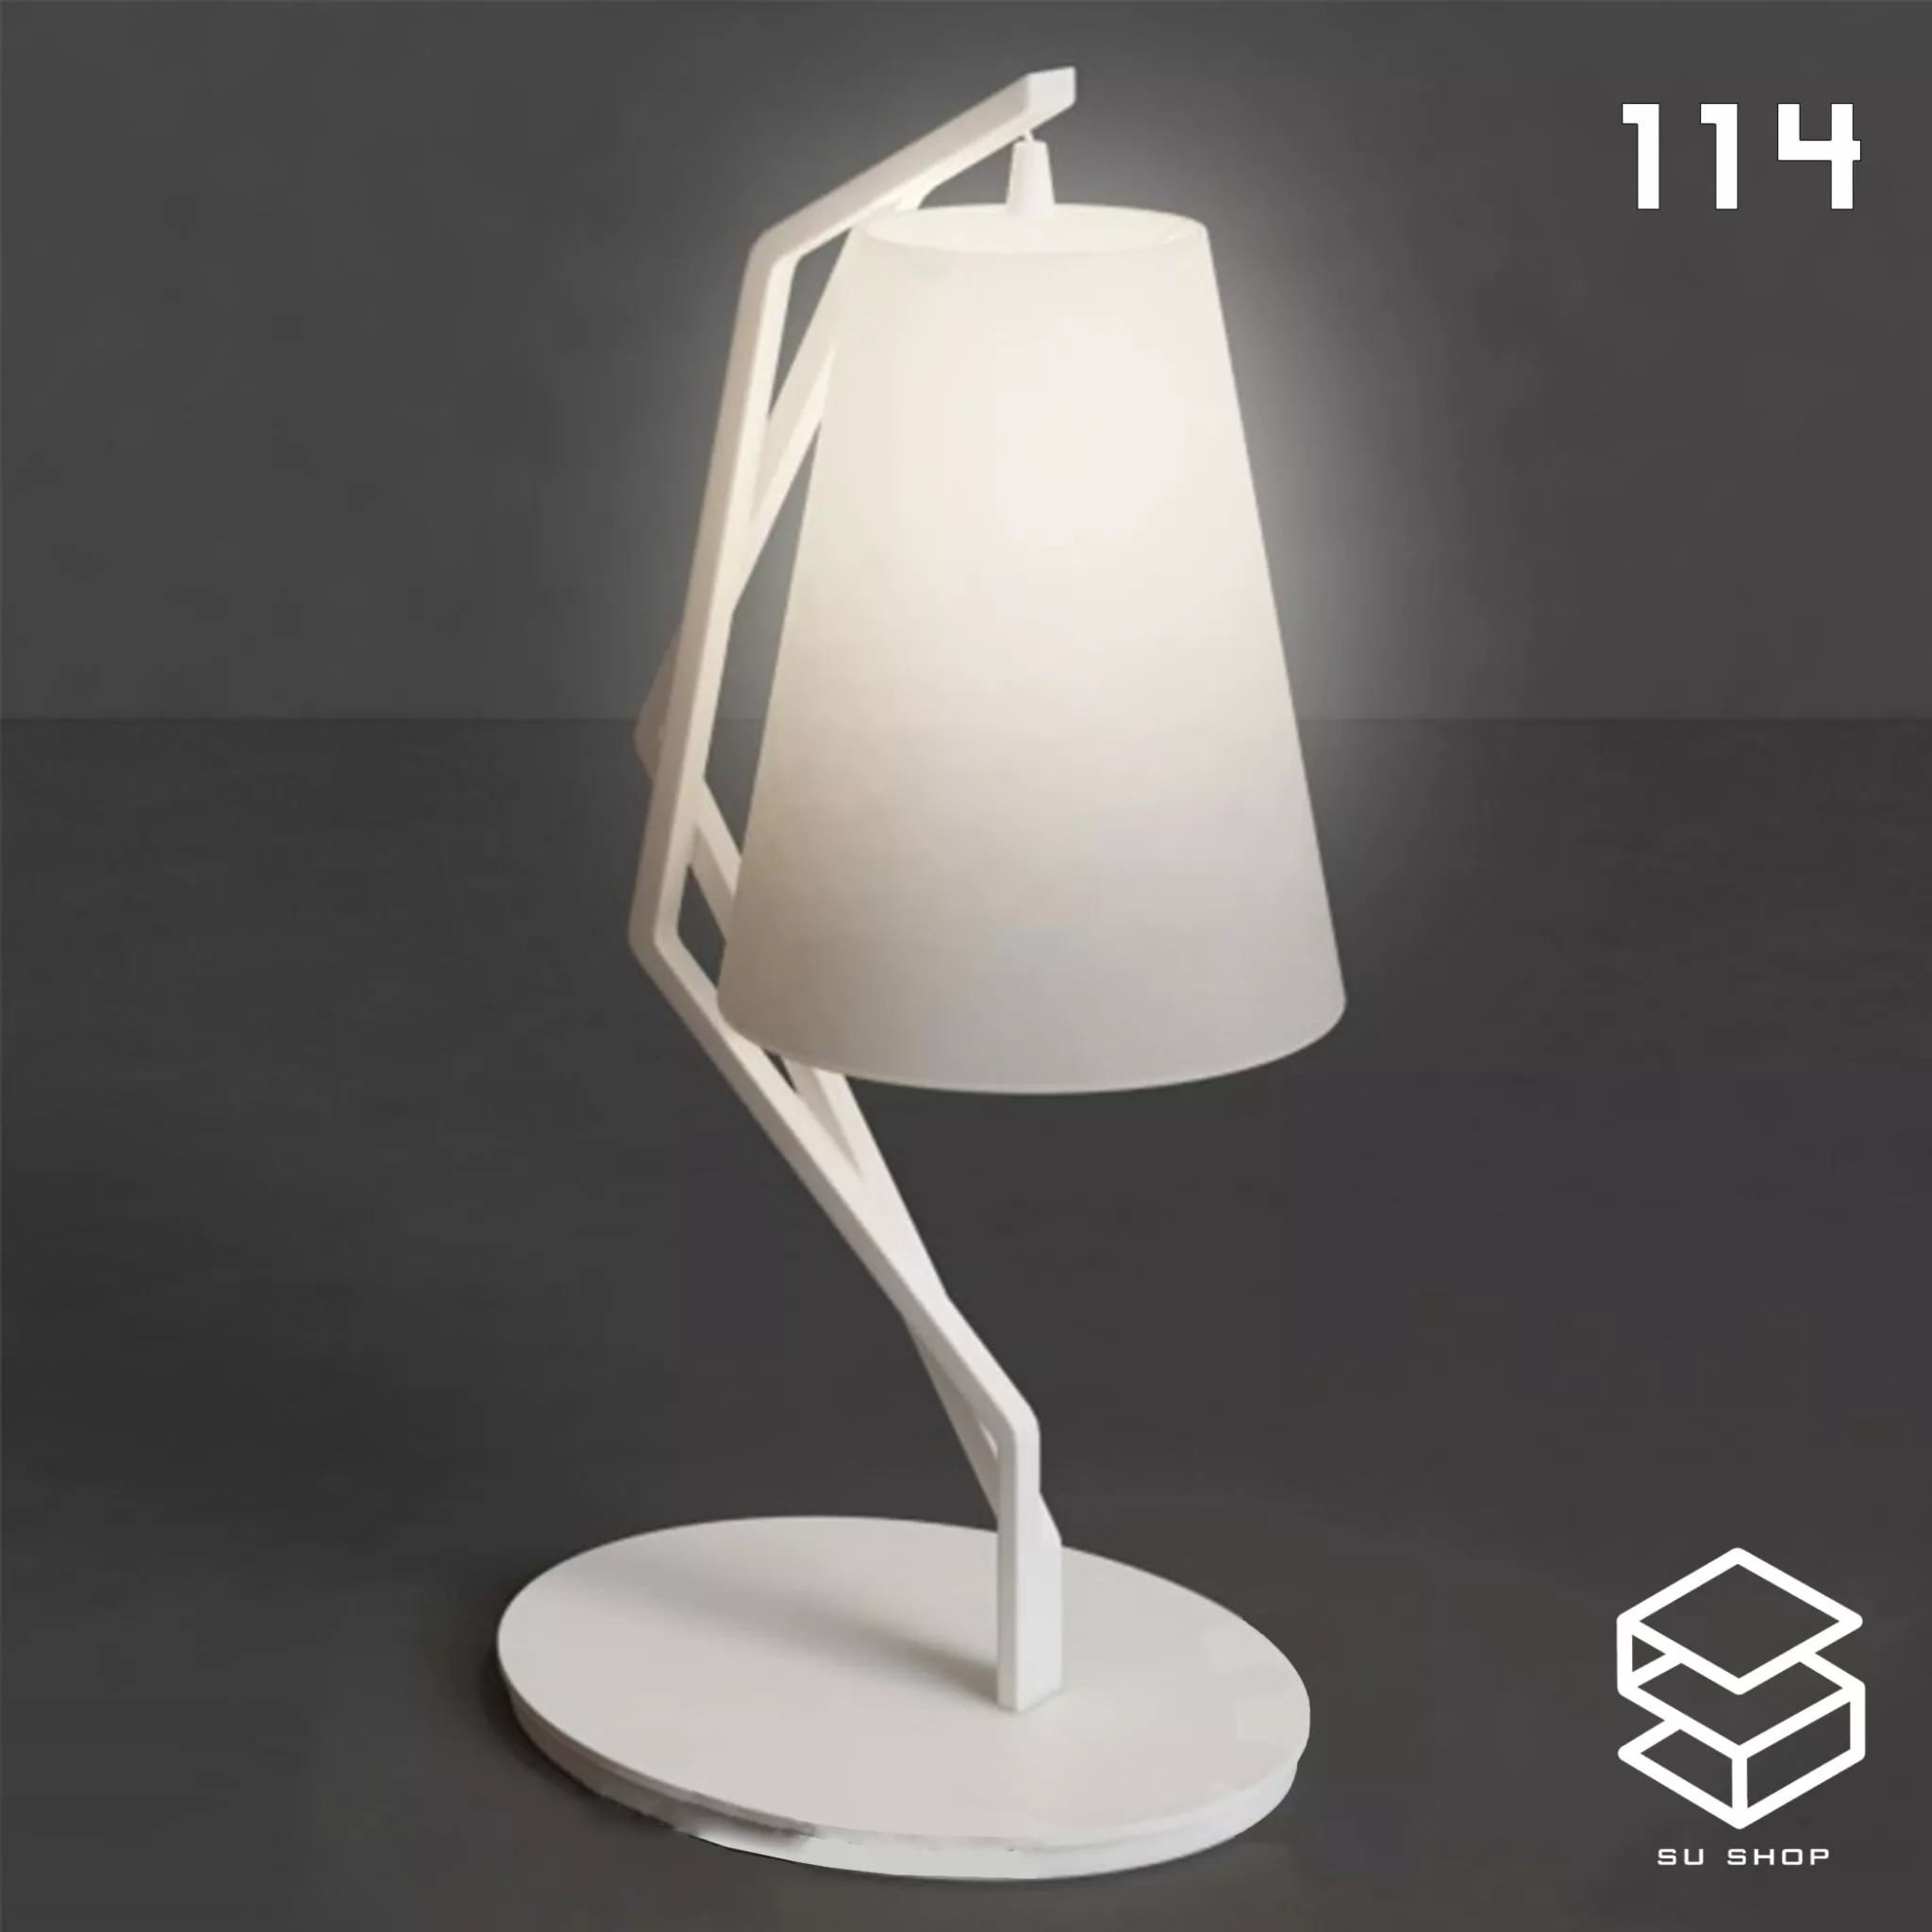 MODERN TABLE LAMP - SKETCHUP 3D MODEL - VRAY OR ENSCAPE - ID14680